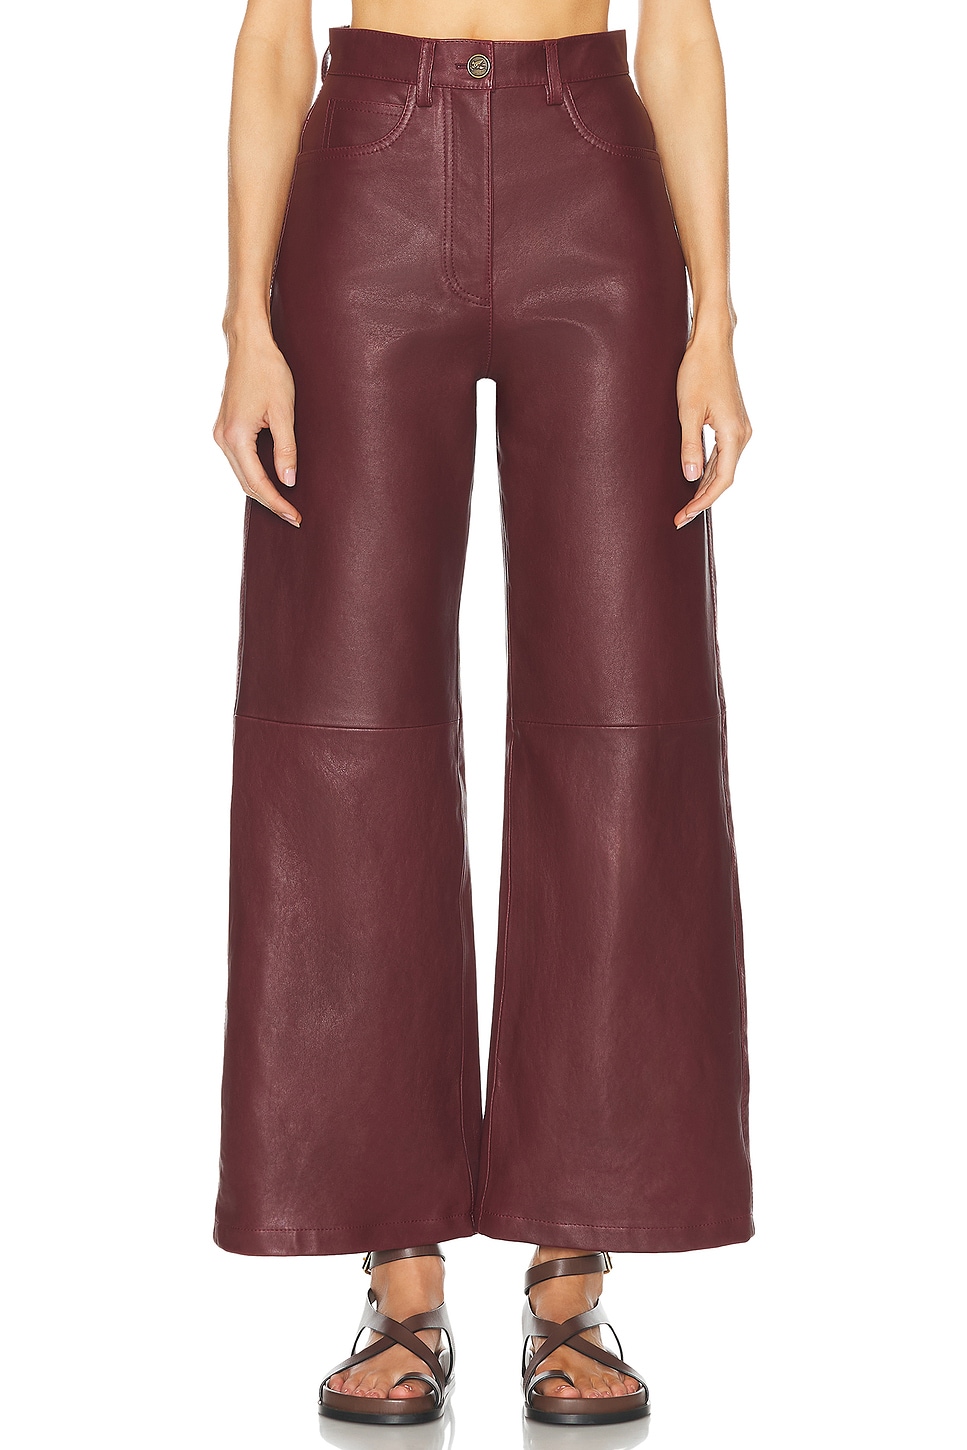 Image 1 of Etro Leather Wide Leg Pant in Plum